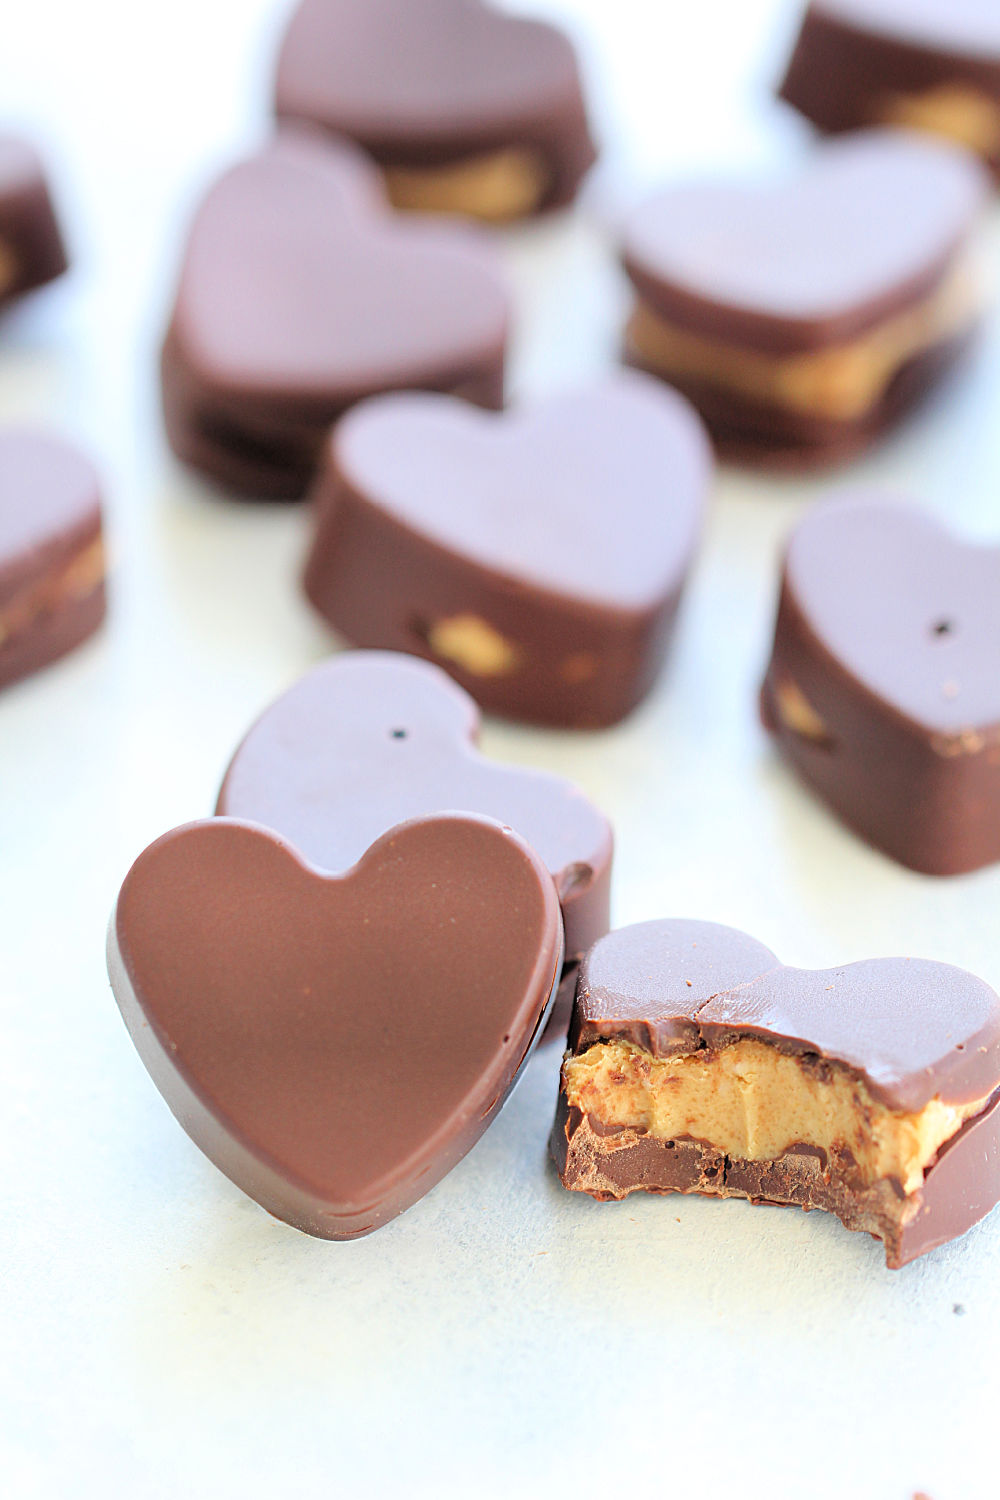 Peanut Butter Chocolate Hearts (Homemade Reese's) with a bite taken out of one heart